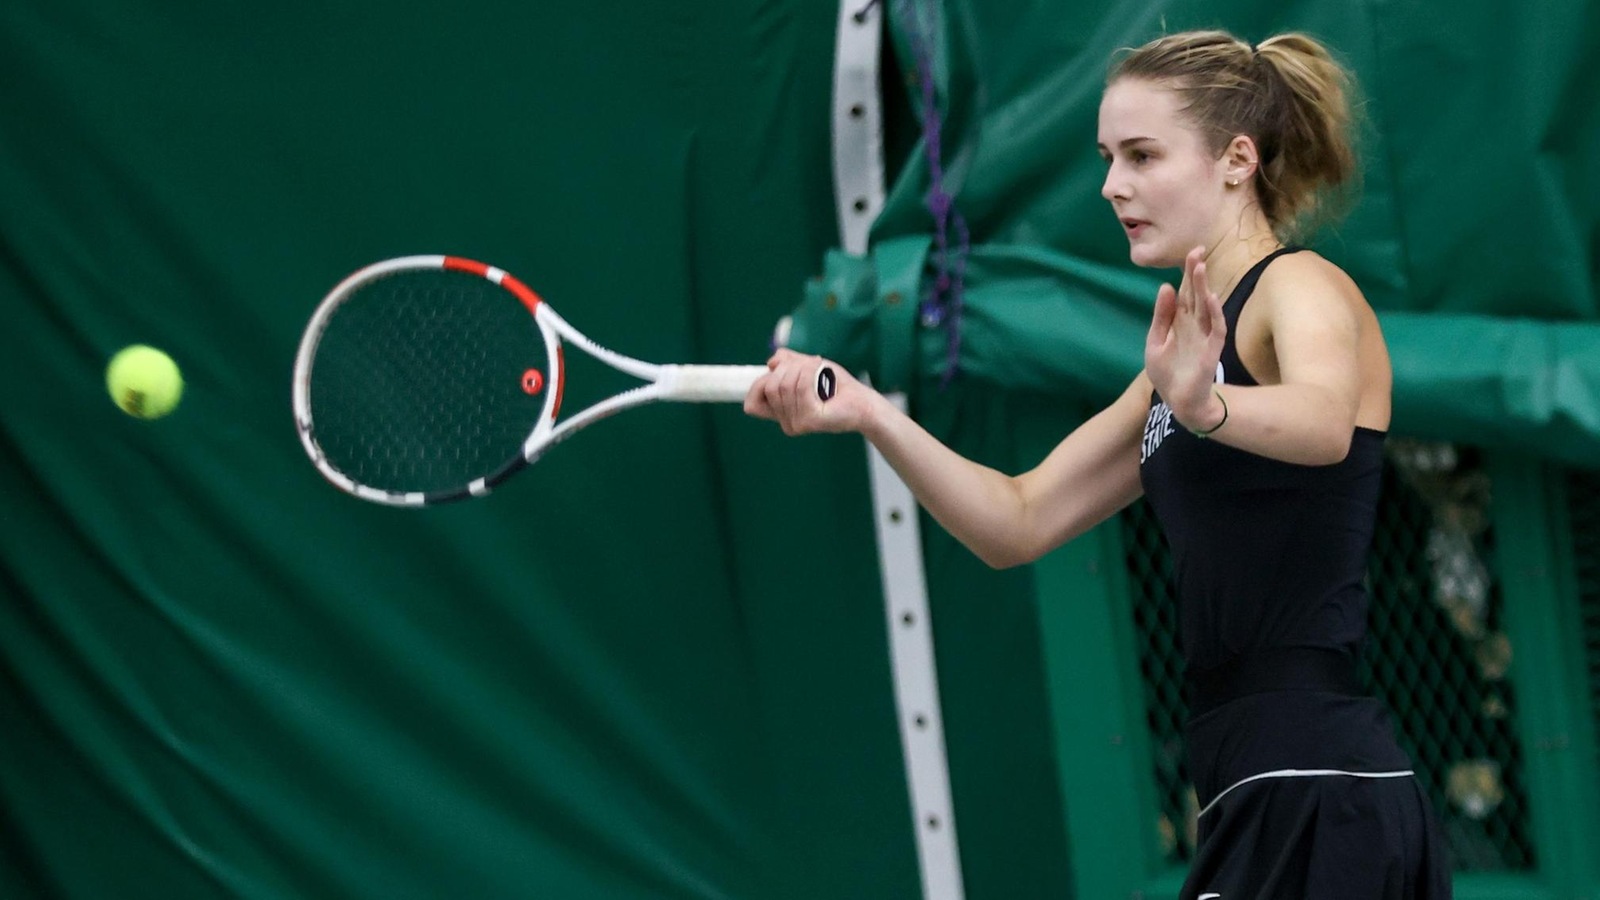 Cleveland State Women’s Tennis Earns 5-2 Victory Over Duquesne